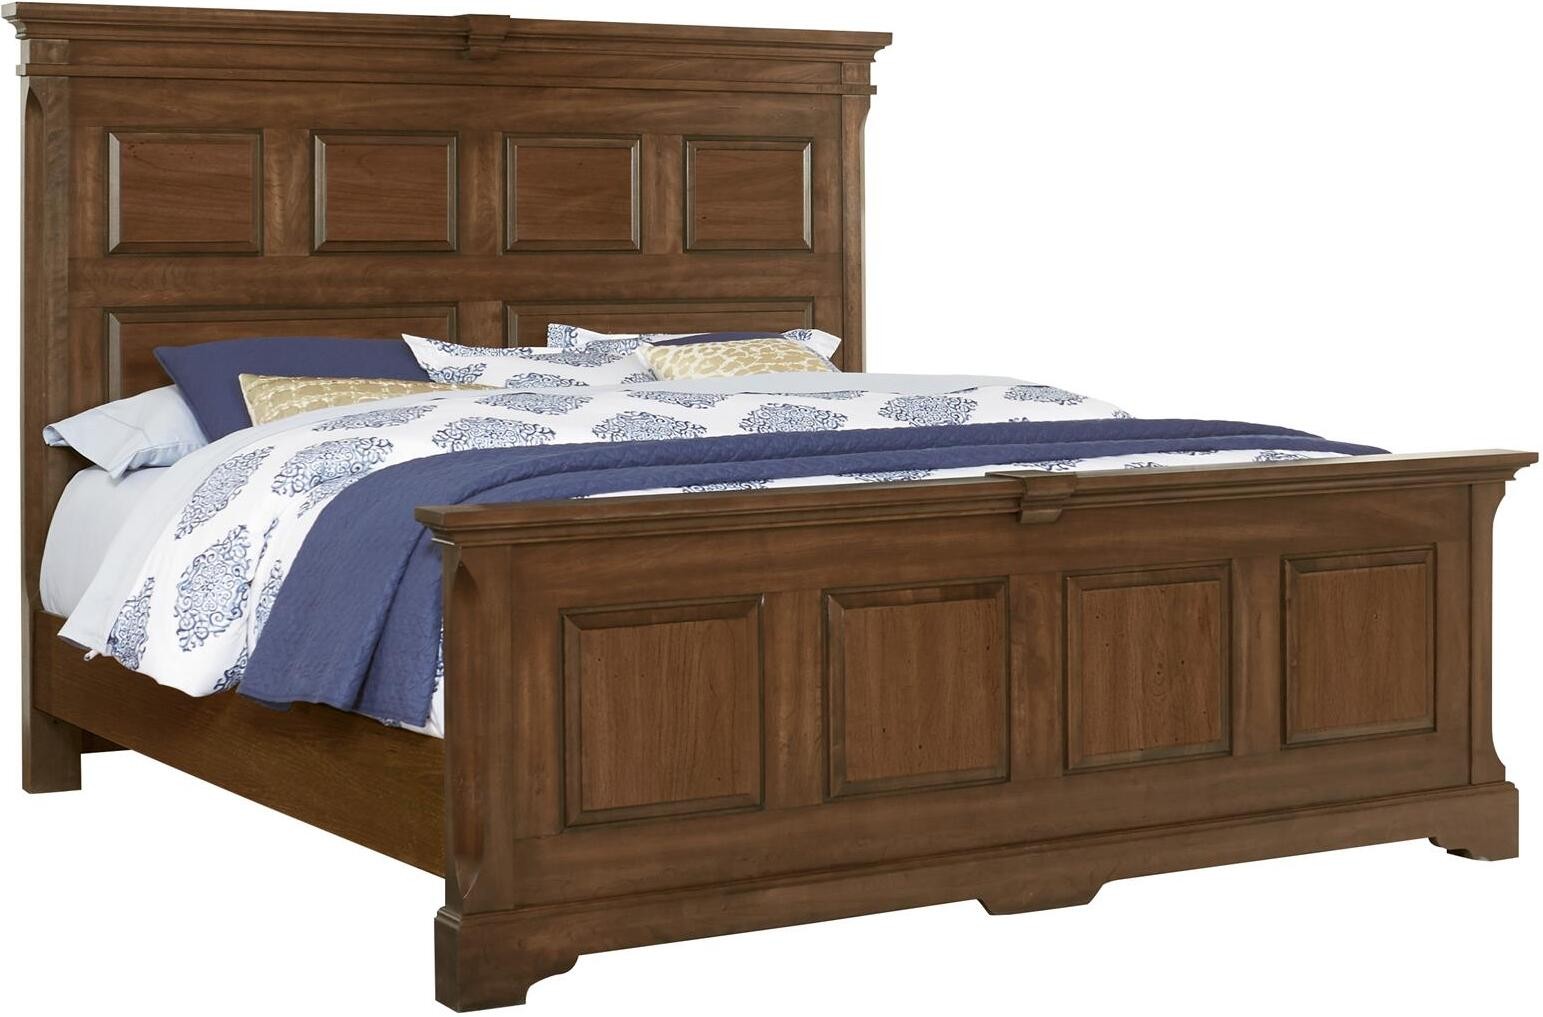 Vaughan Bassett Heritage King Mansion Bed In Amish Cherry 1stopbedrooms